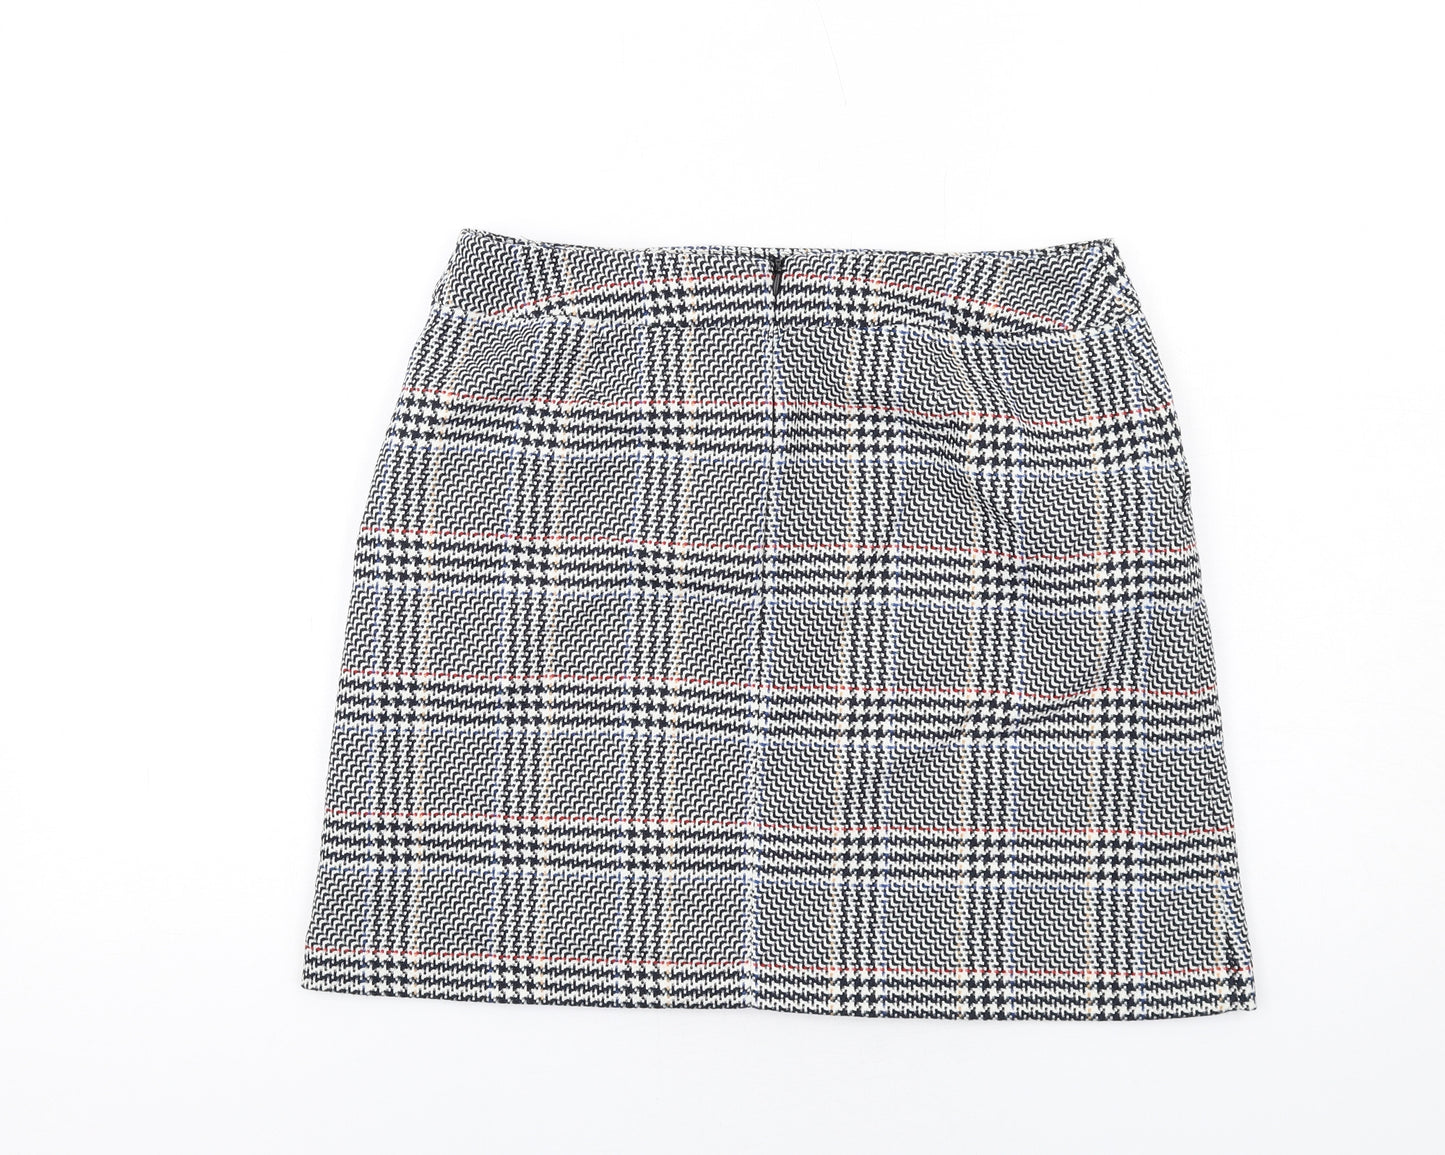 Marks and Spencer Womens Multicoloured Plaid Polyester A-Line Skirt Size 12 Zip